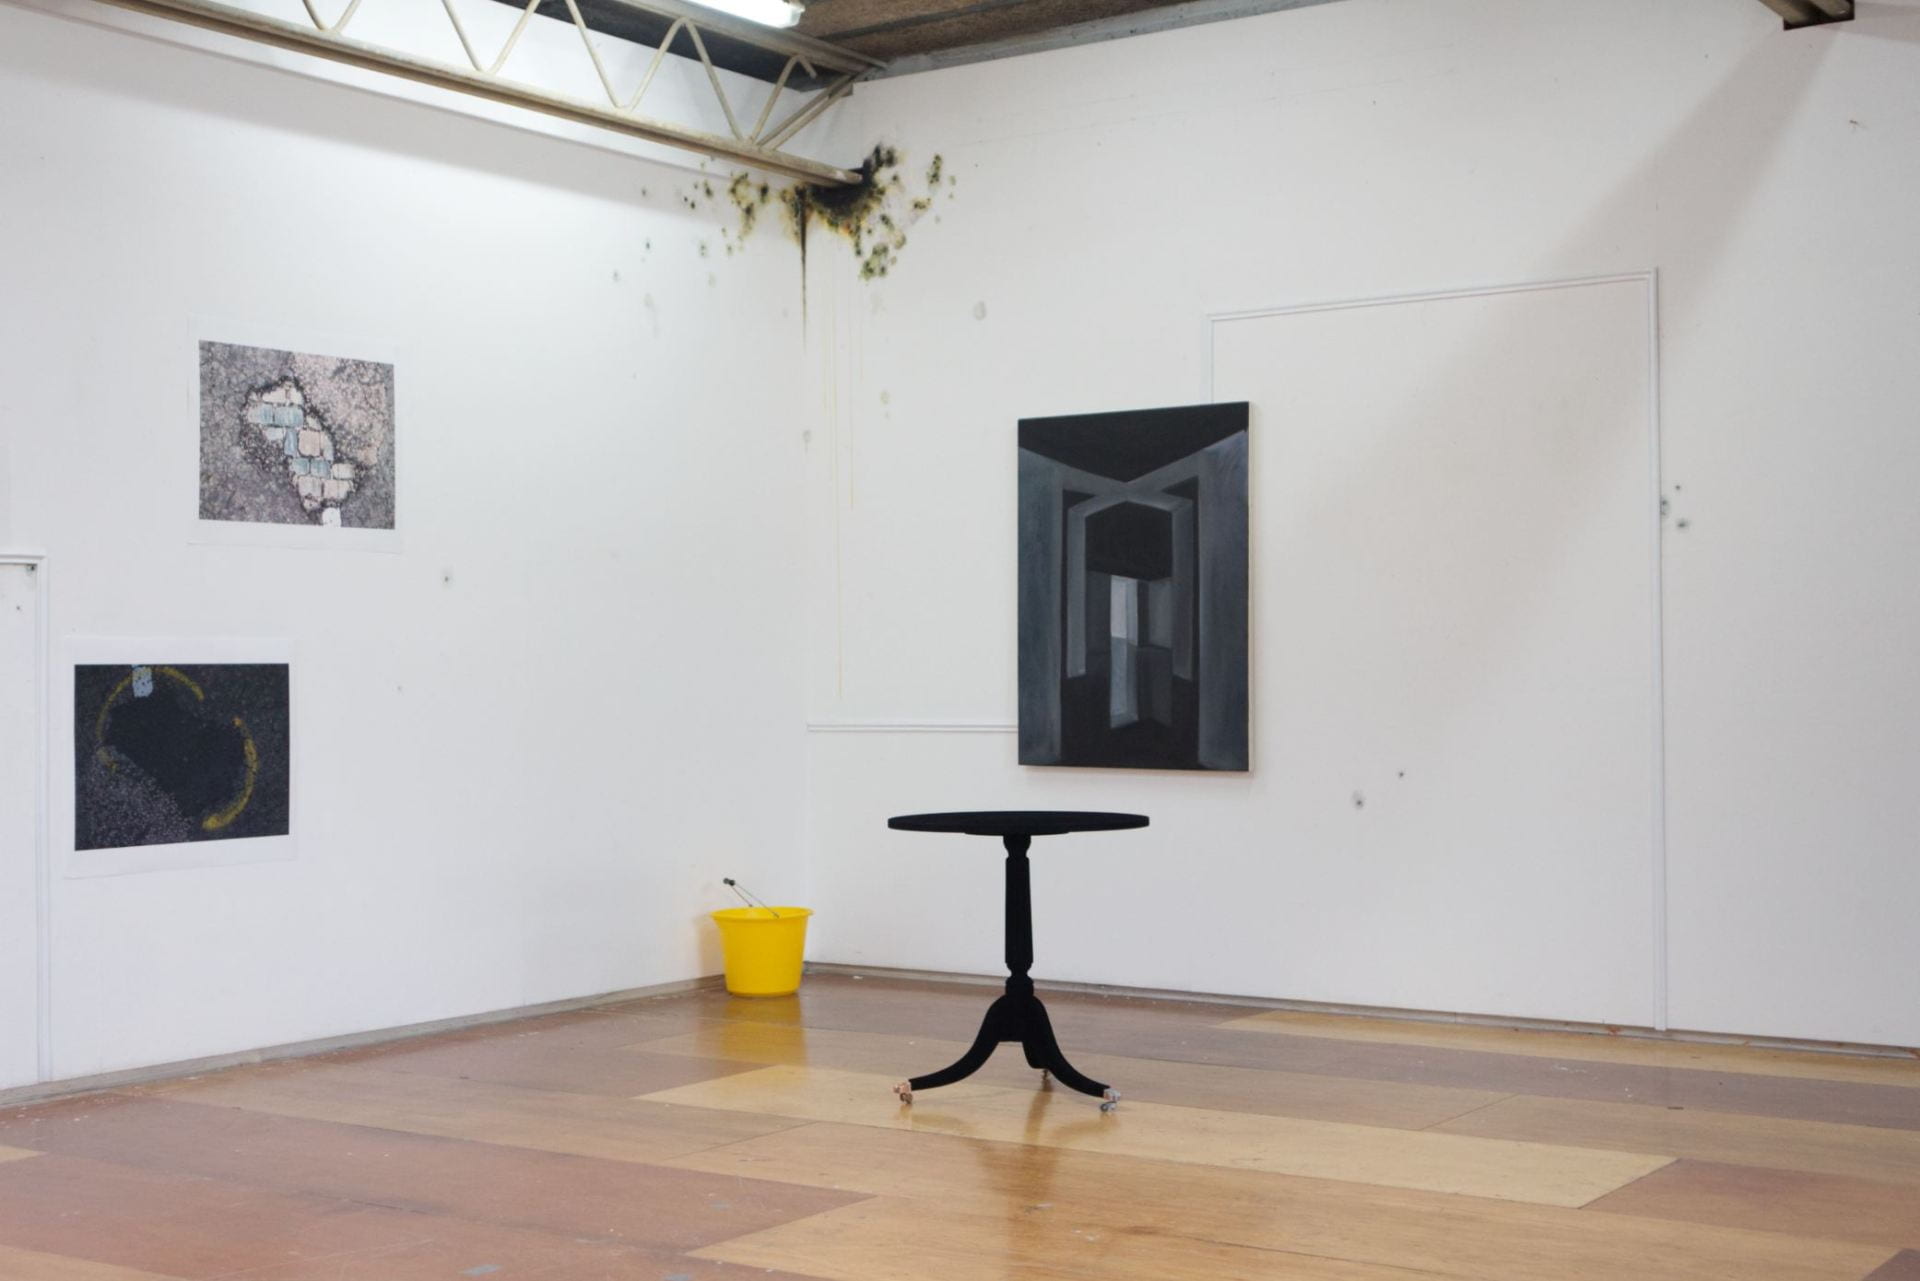 Installation shot of wall trim, hand-painted mould, oil painting, photographic prints, occasion table painted in Musou black and yellow bucket.